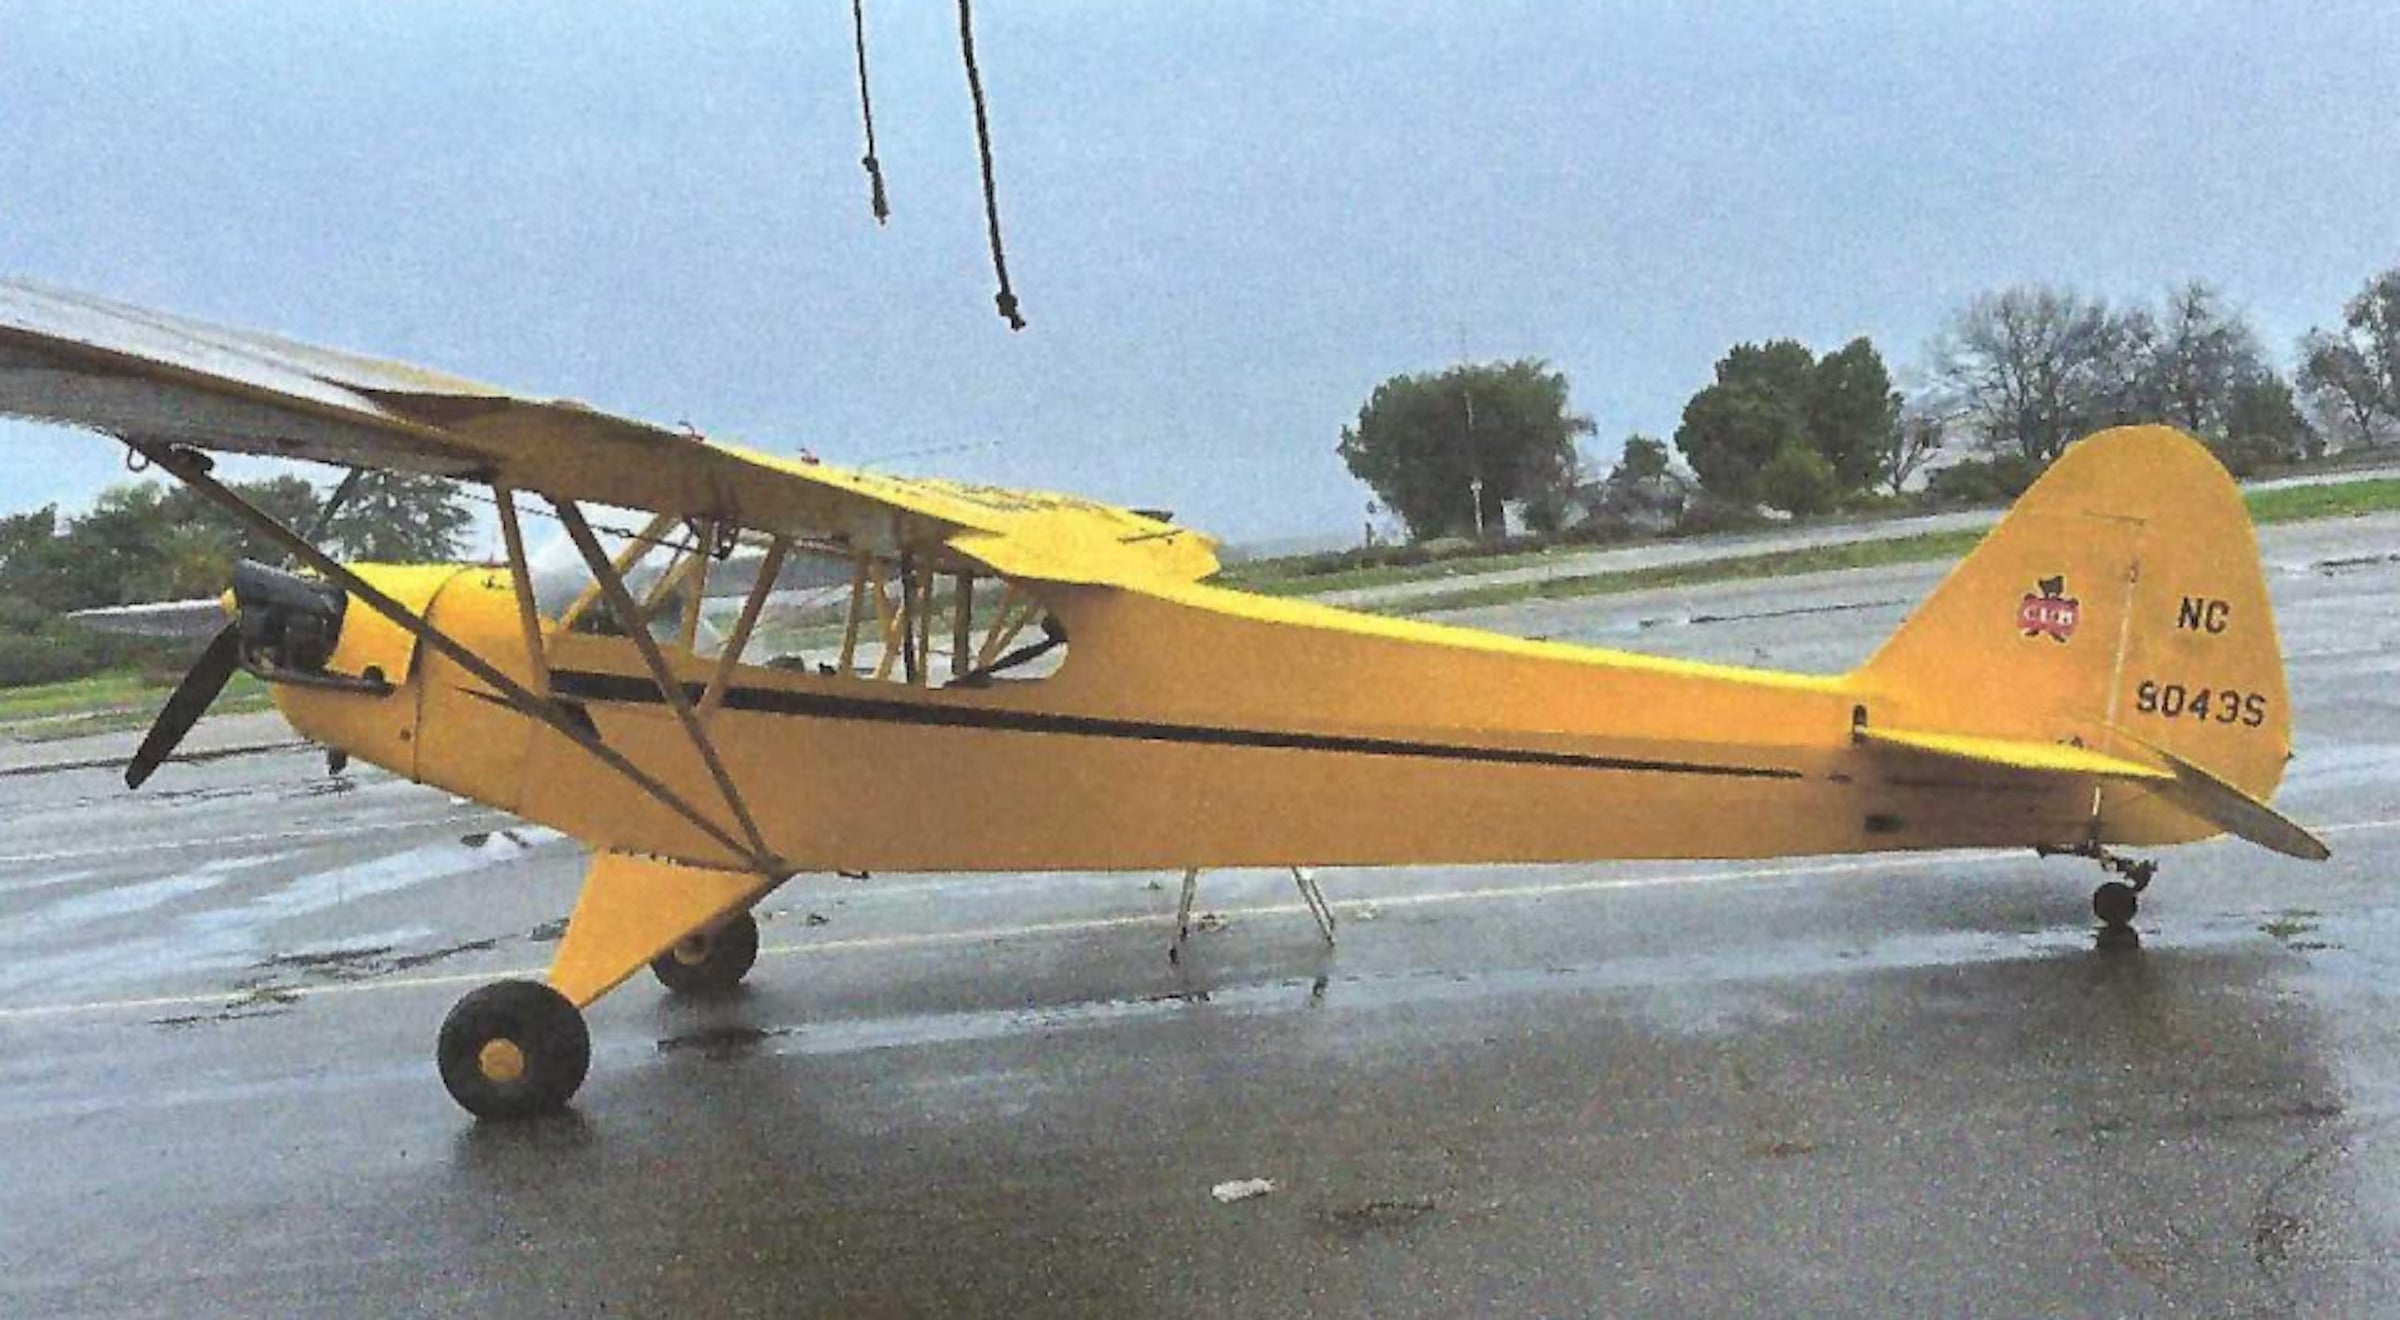 This 1947 Piper J-3 Cub Is a Historic, Beloved ‘AircraftForSale’ Top Pick